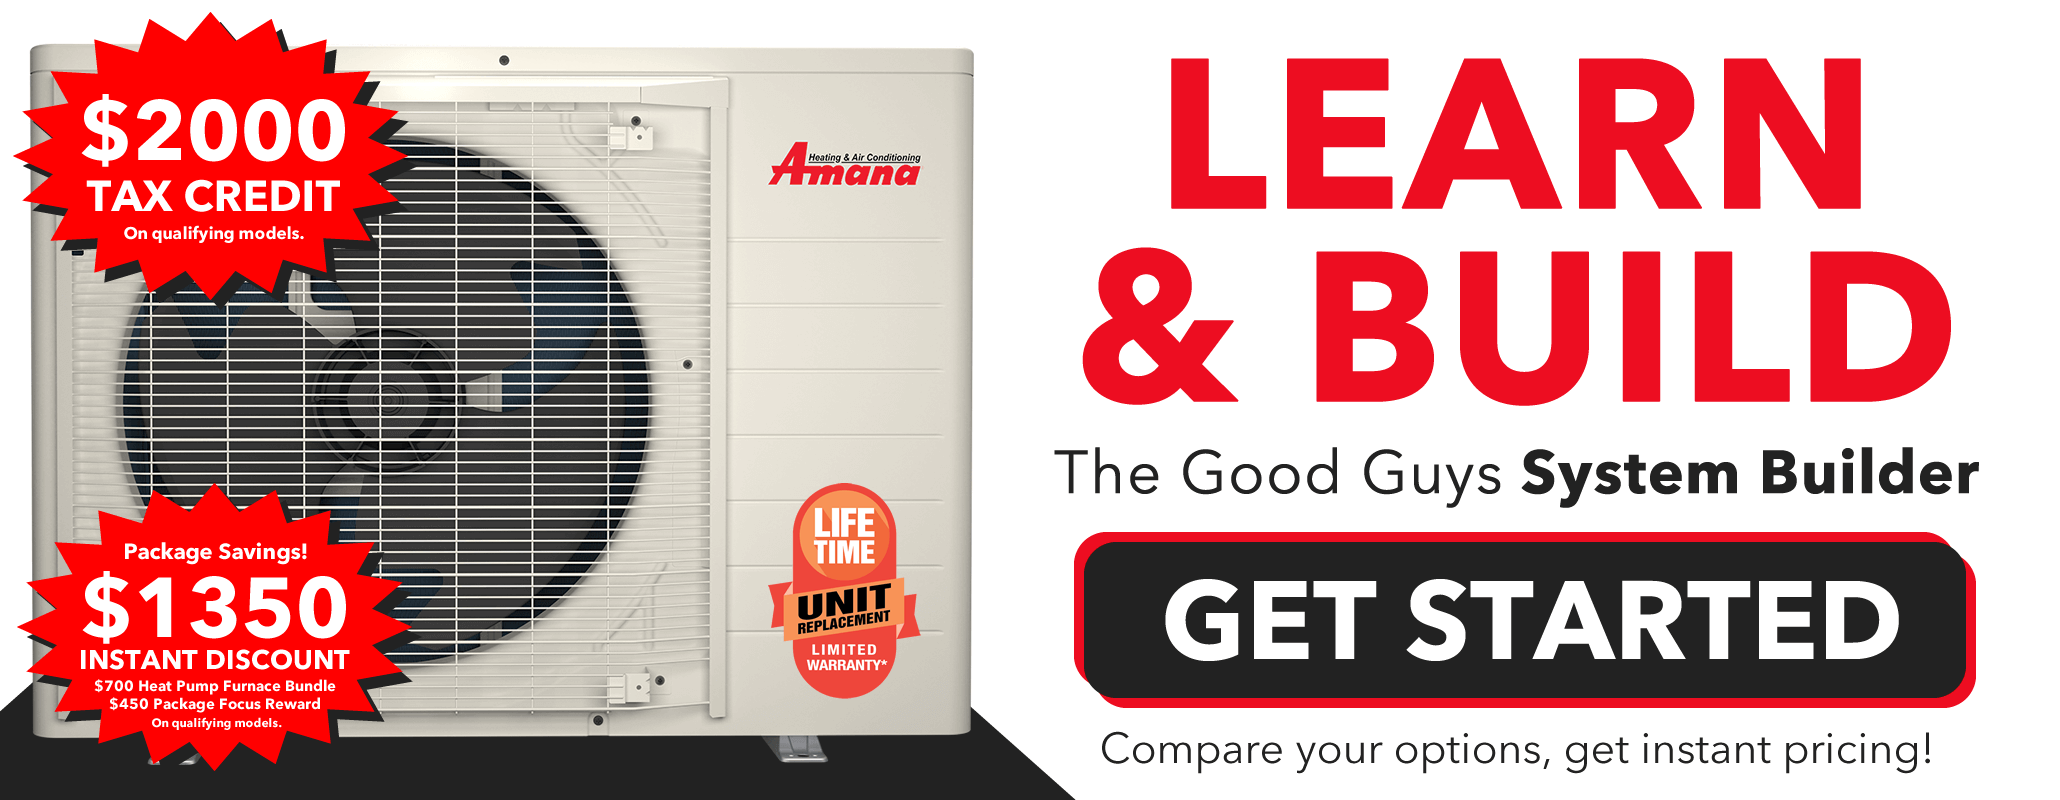 Learn & Build with The Good Guys System Builder. Click this to get started. Compare your options and get instant pricing.